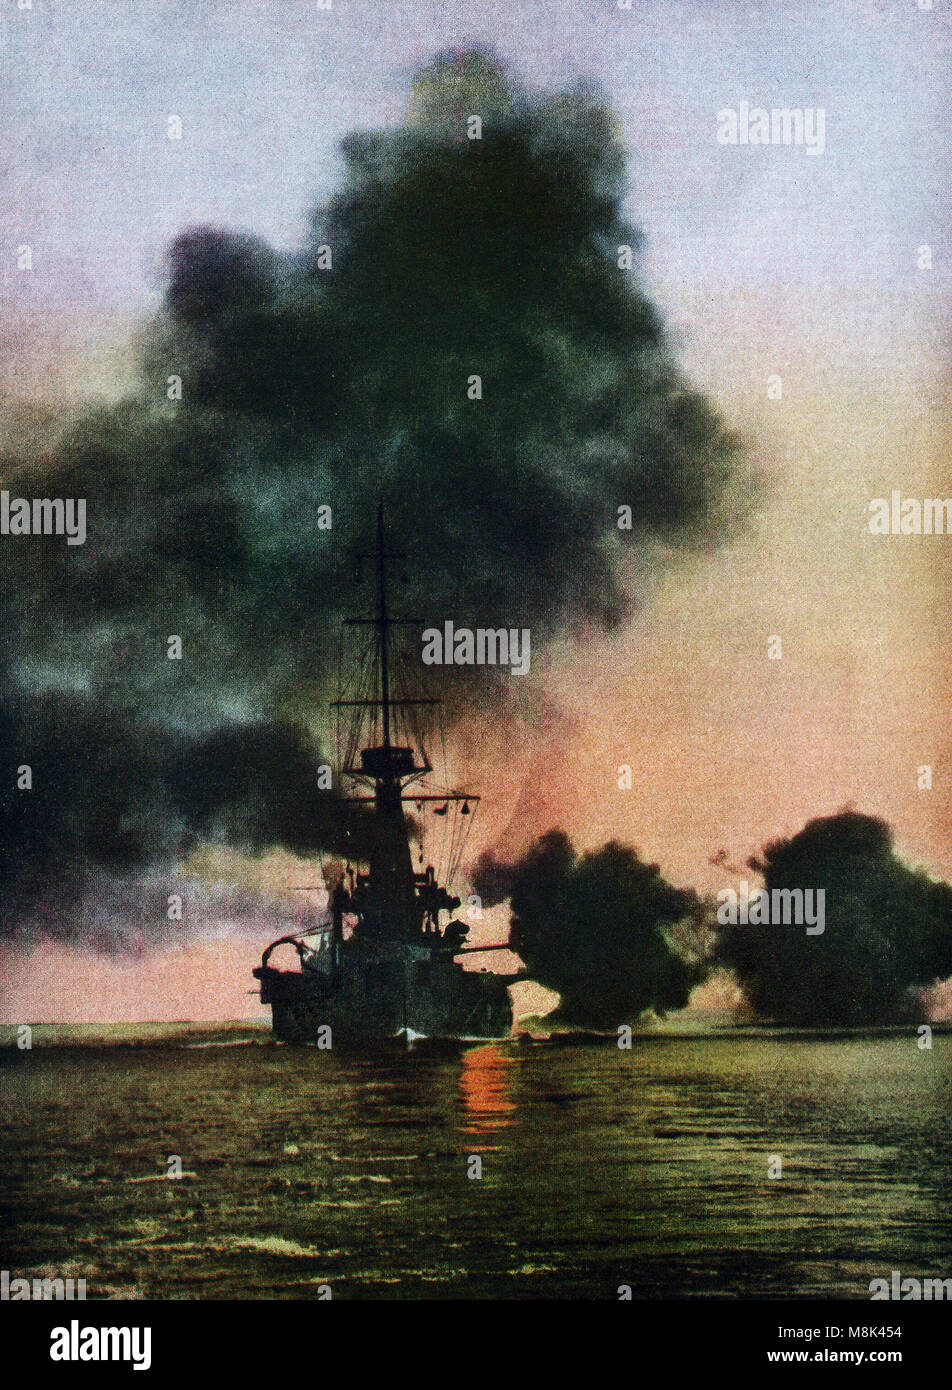 This illustration dates to around 1917, the time of World War I. Its caption reads:British ship in action in the Dardanlles. The Dardanelles Campaign by the British, French, Russian, and Australian navies against the Ottomans took place between February 1915 and January 1916. The Ototmans prevailed and this campaign was followed by the Gallipoli Campaign. Stock Photo